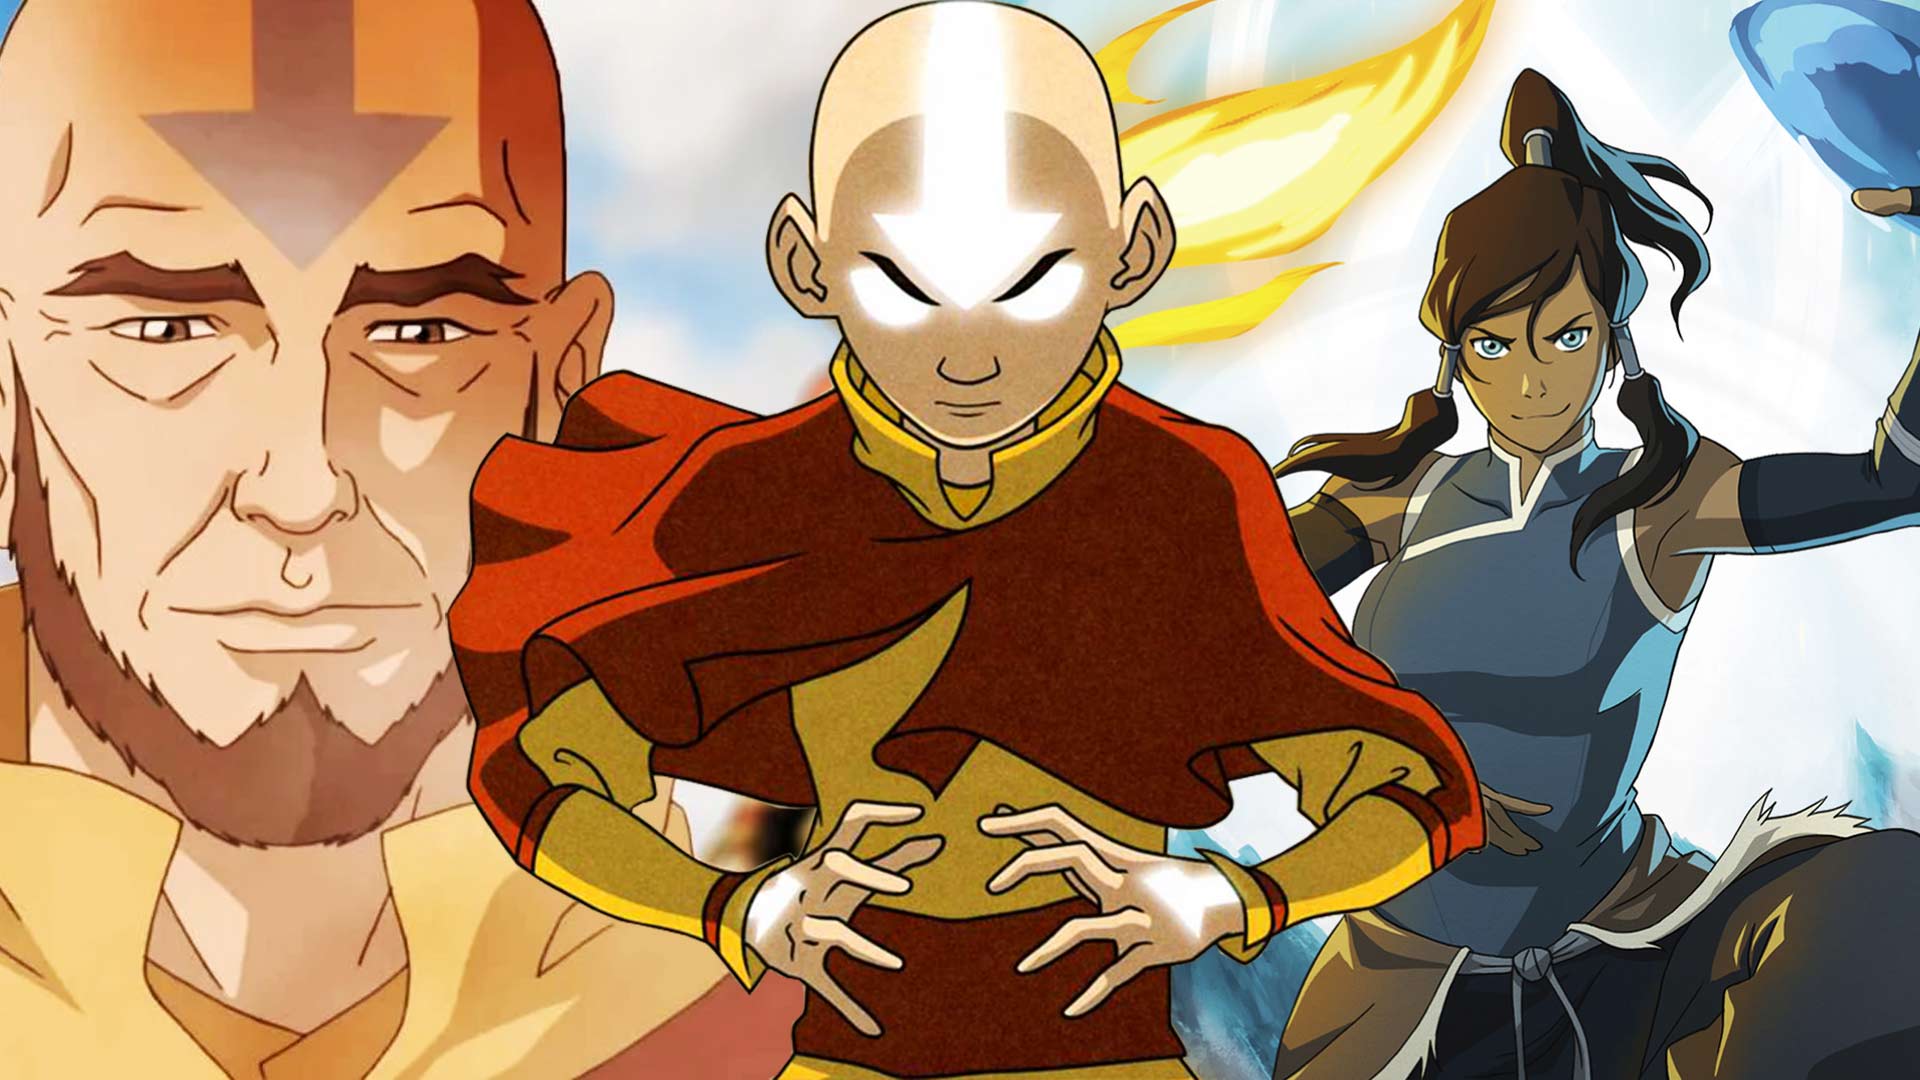 ...with the defeat of Fire Lord Ozai at the hands of Aang but now the viewe...